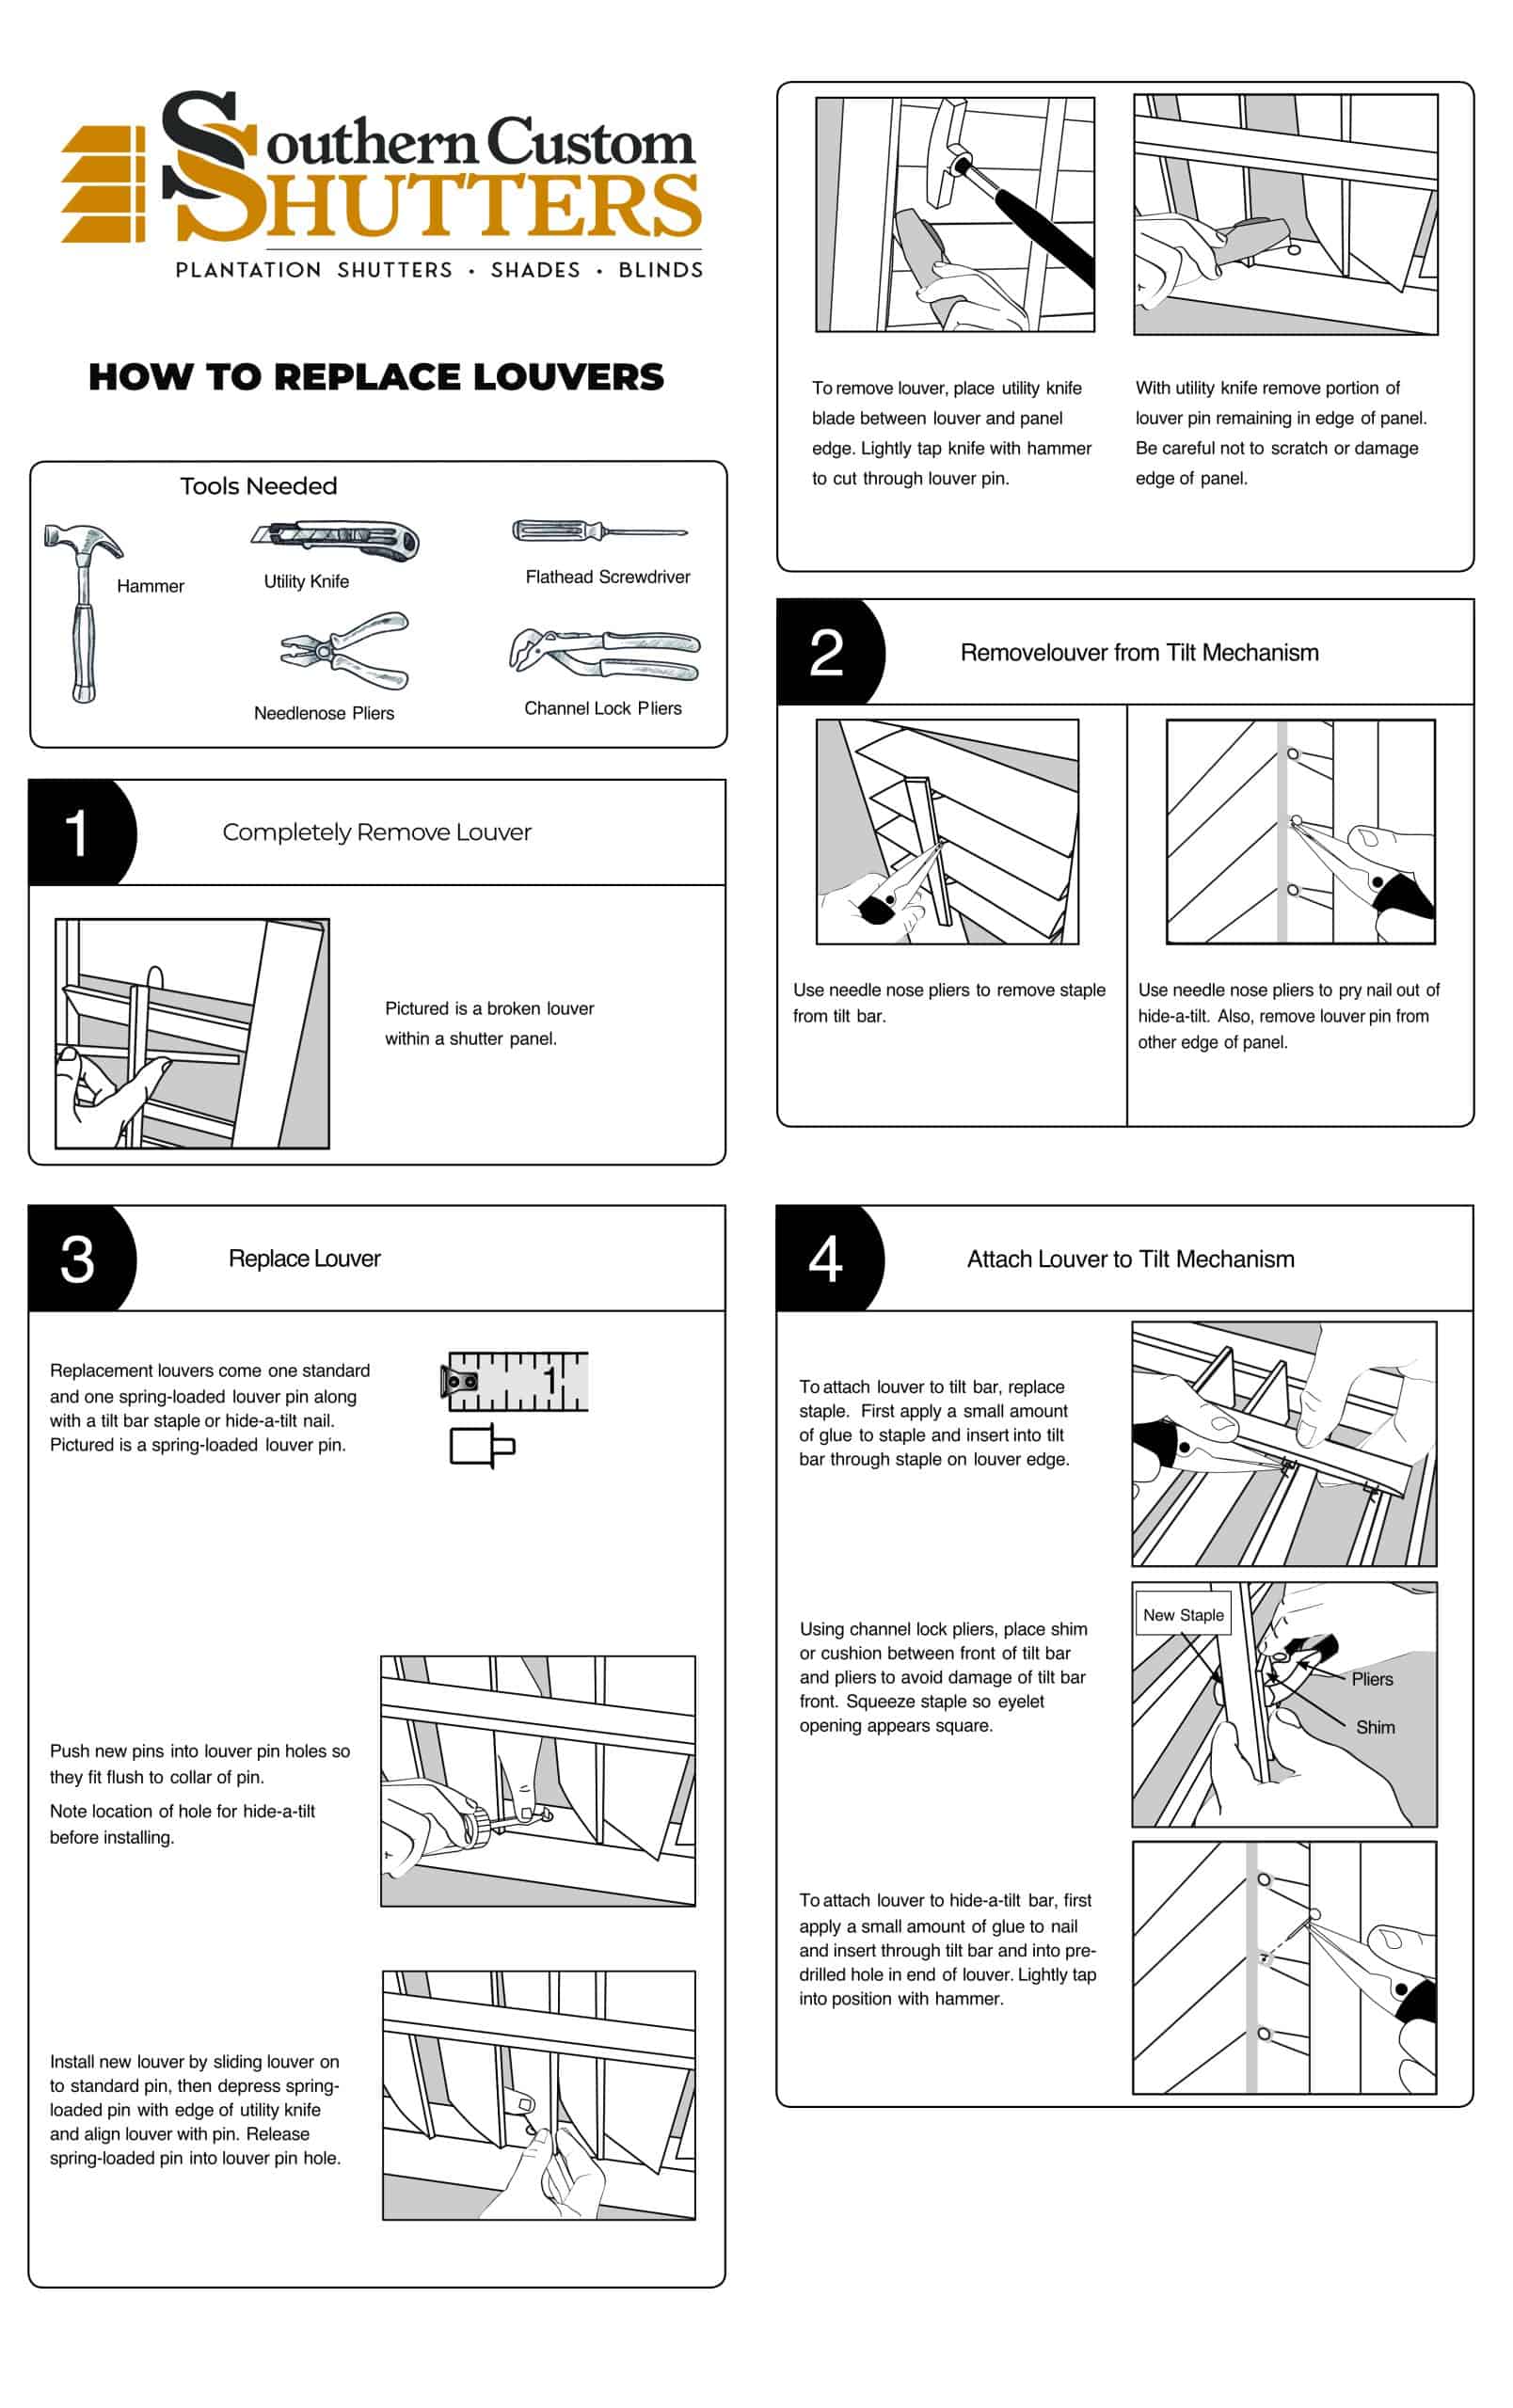 How to Replace Broken Louvers Infographic